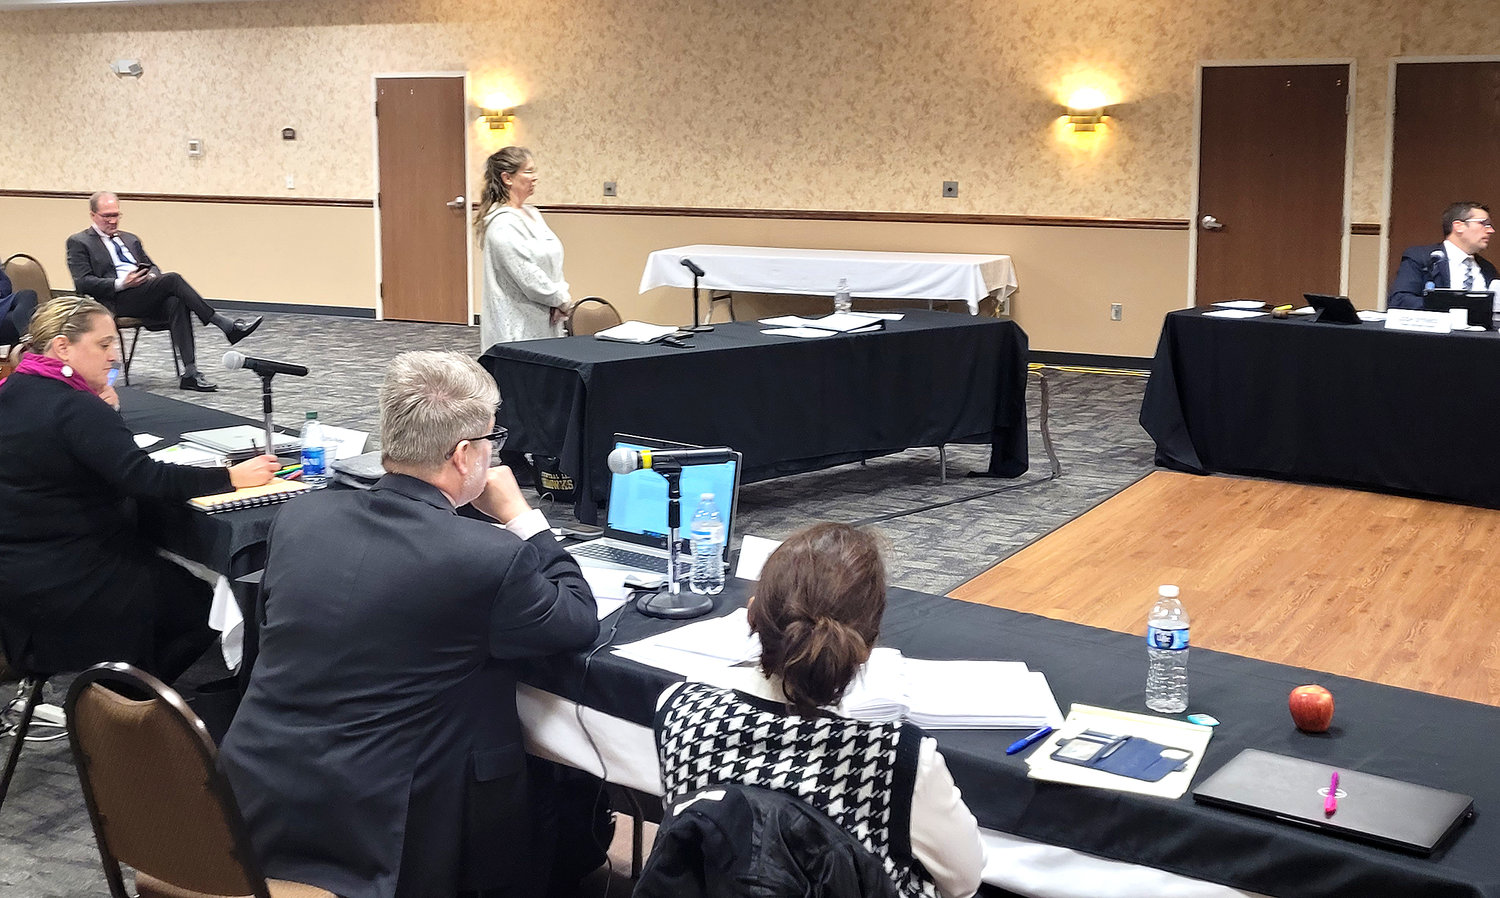 Lee County resident Coette Gida is sworn in prior to giving testimony Tuesday afternoon at Quality Inn and Suites in Fort Madison. Gida testified in the IUB's eminent domain docket with the Iowa Utilities Board.